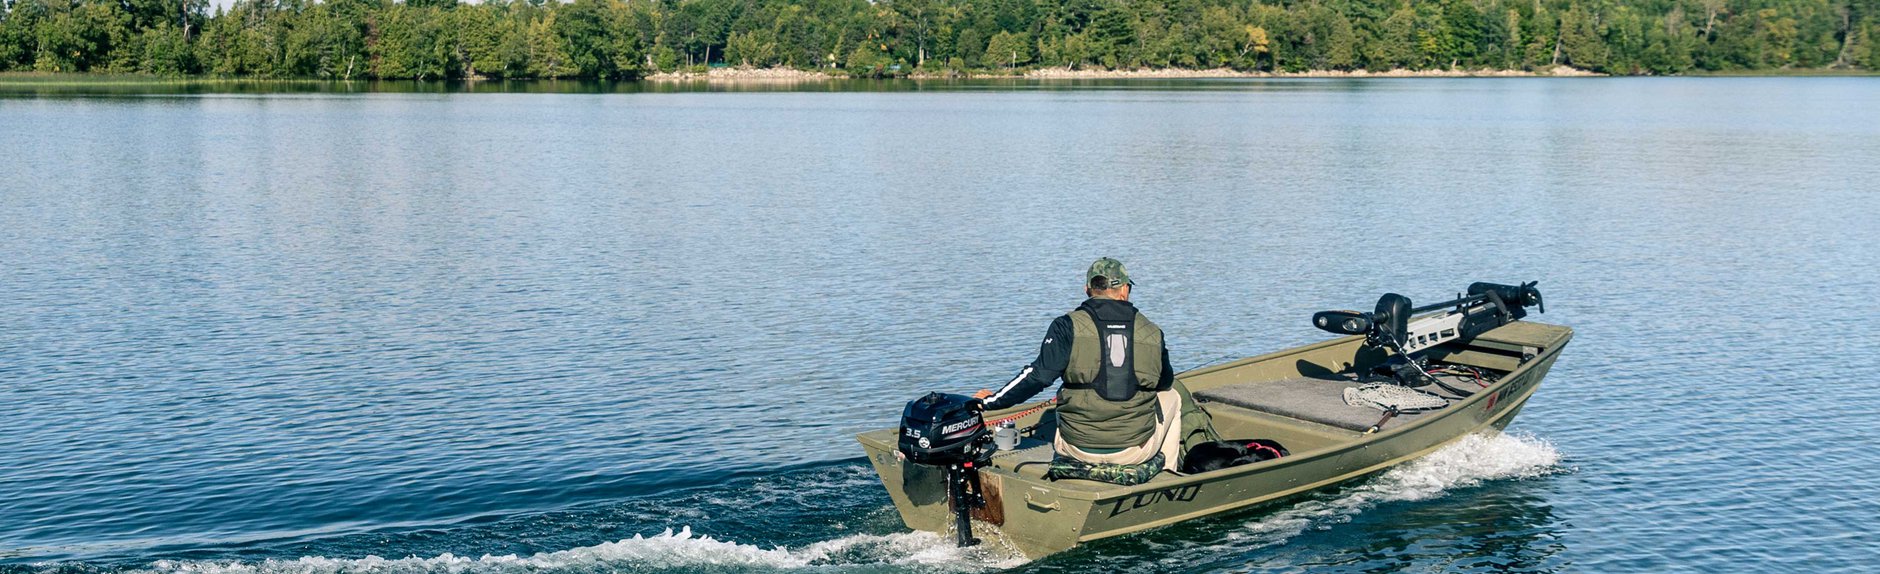 Advice on how to choose the appropriate horsepower rating for the portable outboard motor that will be used on your boat